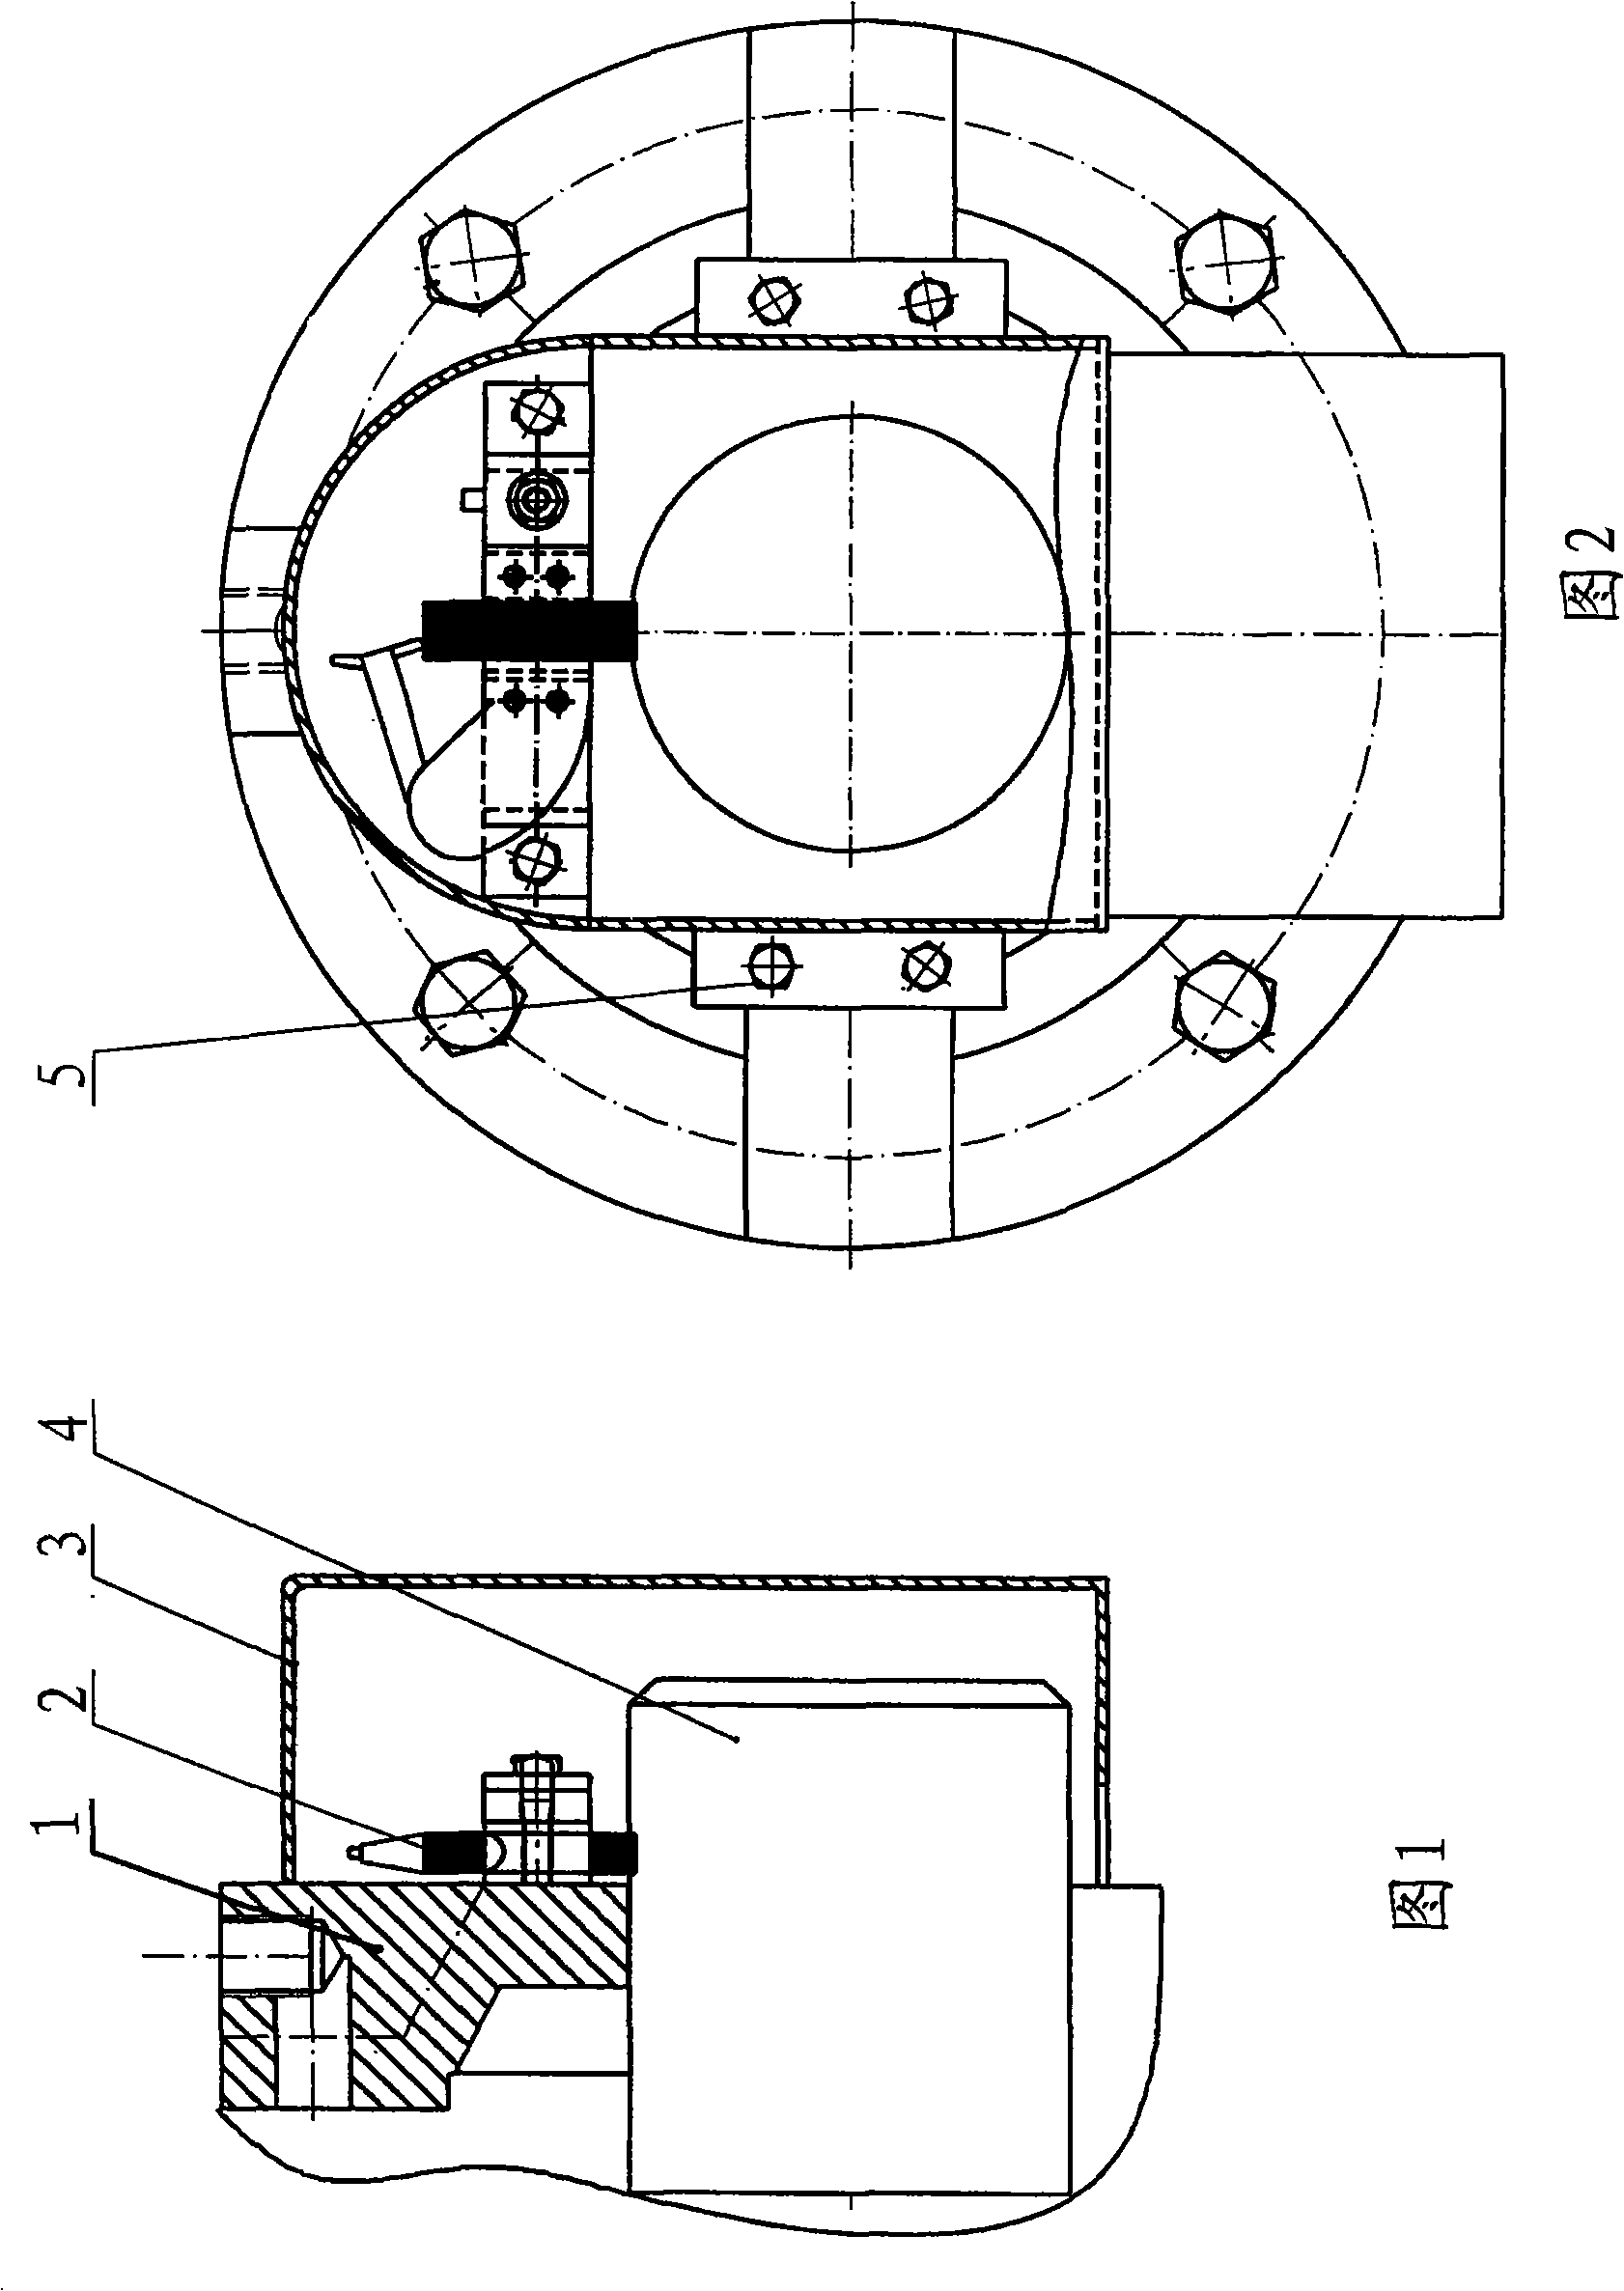 Frequency conversion electric motor grounding device